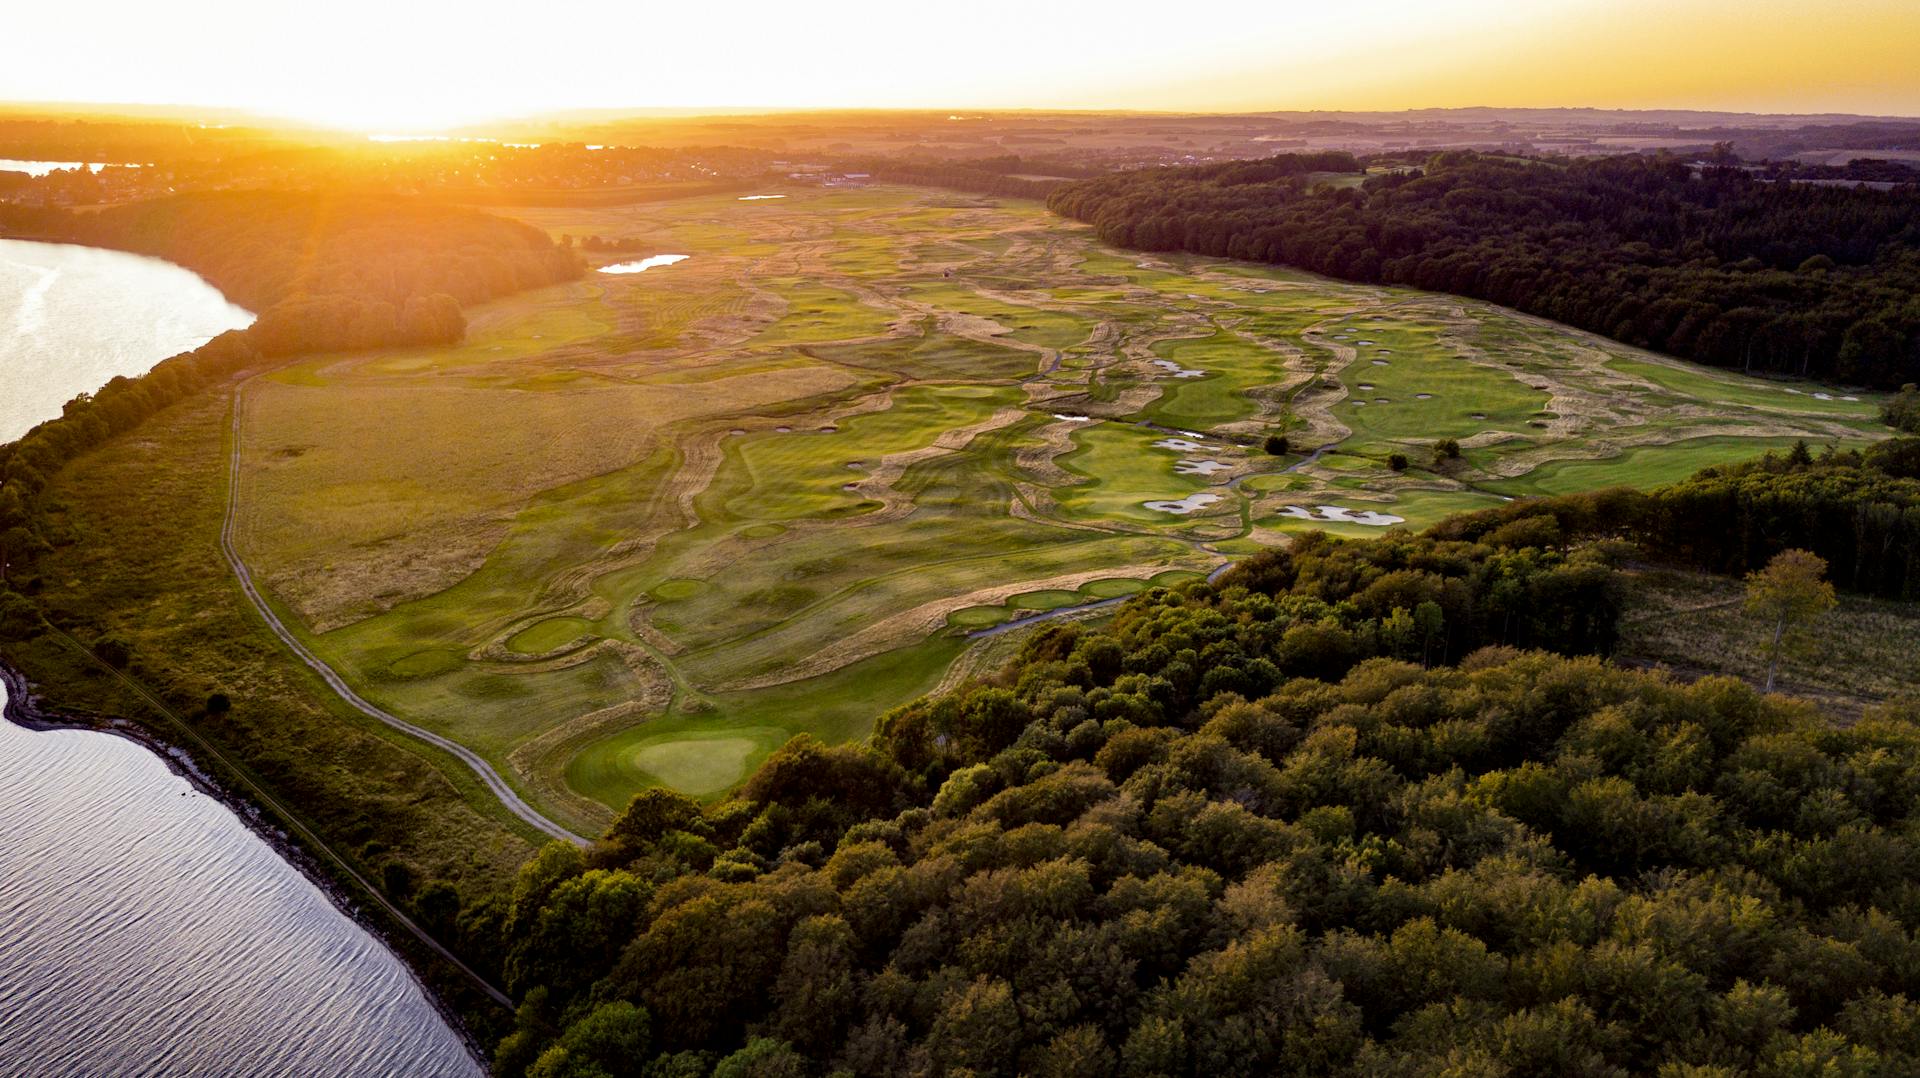 In 2004, the application for establishing a golf club amidst picturesque nature was submitted, resulting in Stensballegaard Golf Club becoming a popular links-style golf club in Denmark. Source: Stensballegaa